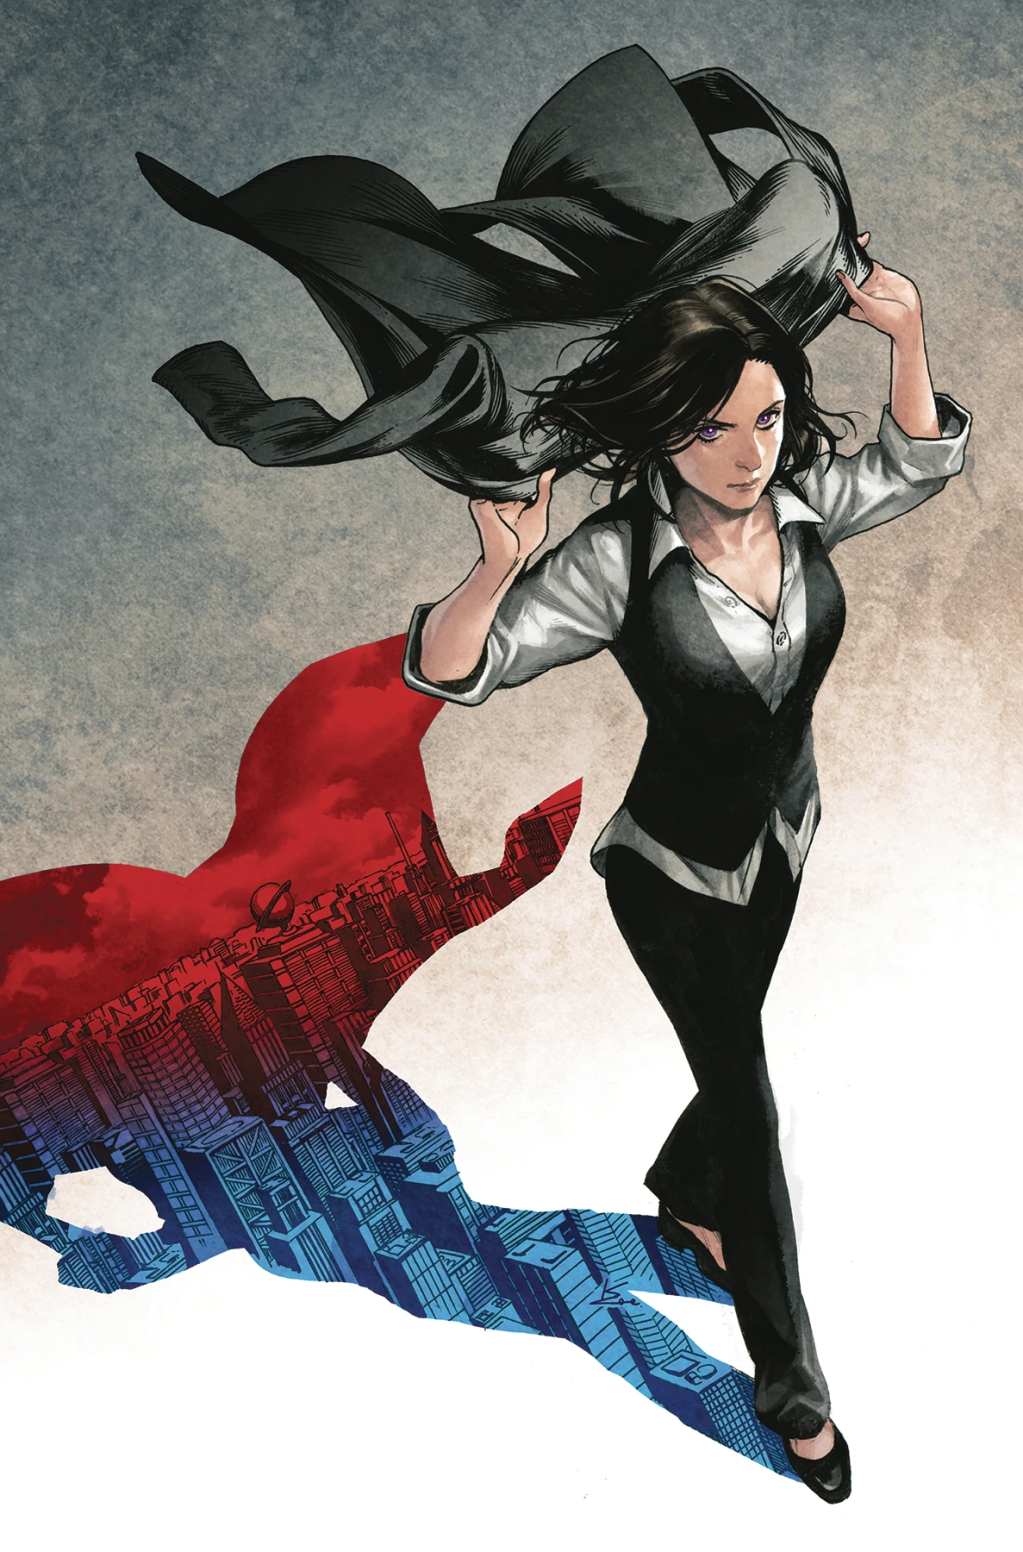 Lois Lane seeks out her next scoop on Kamome Shirahama's variant cover to Lois Lane Vol. 2 #8 "Enemy of the People, Part Eight" (2020), DC